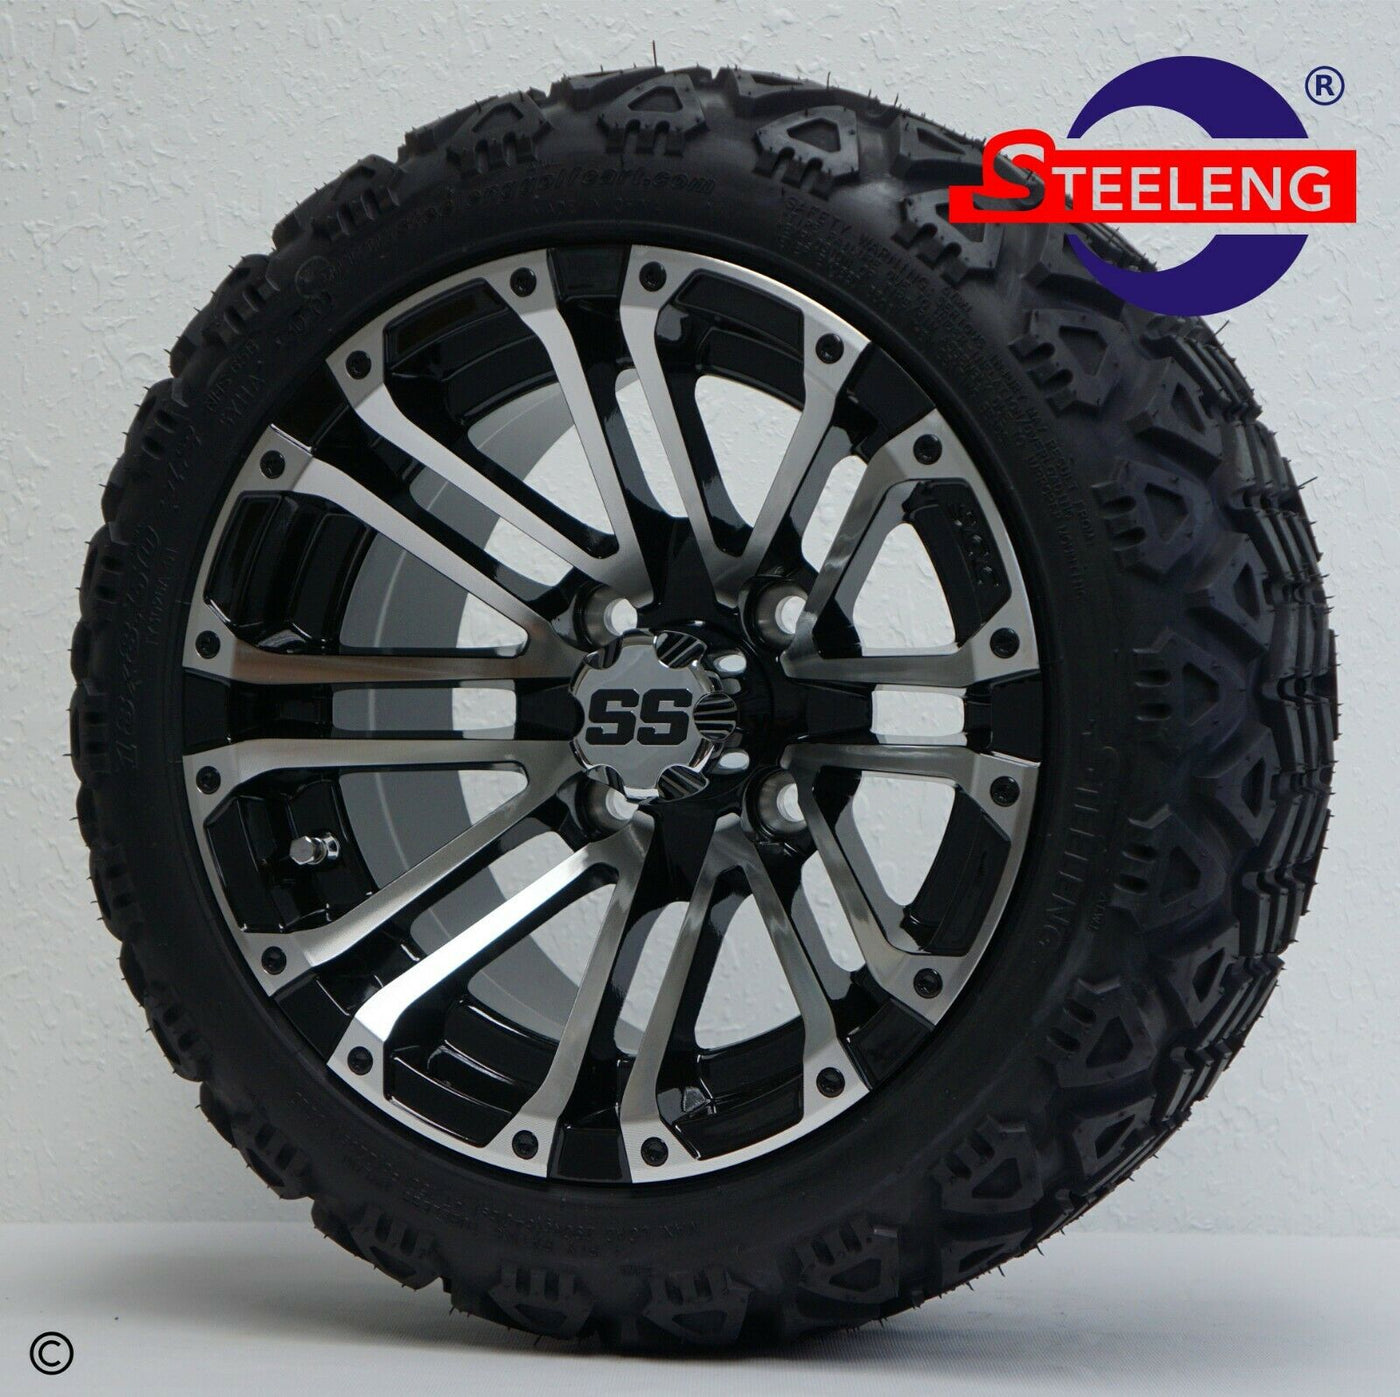 12" LANCER MACHINED / BLACK GOLF CART WHEELS and 12x7-18 ALL TERRAIN TIRES (SET OF 4) WITH LUGS